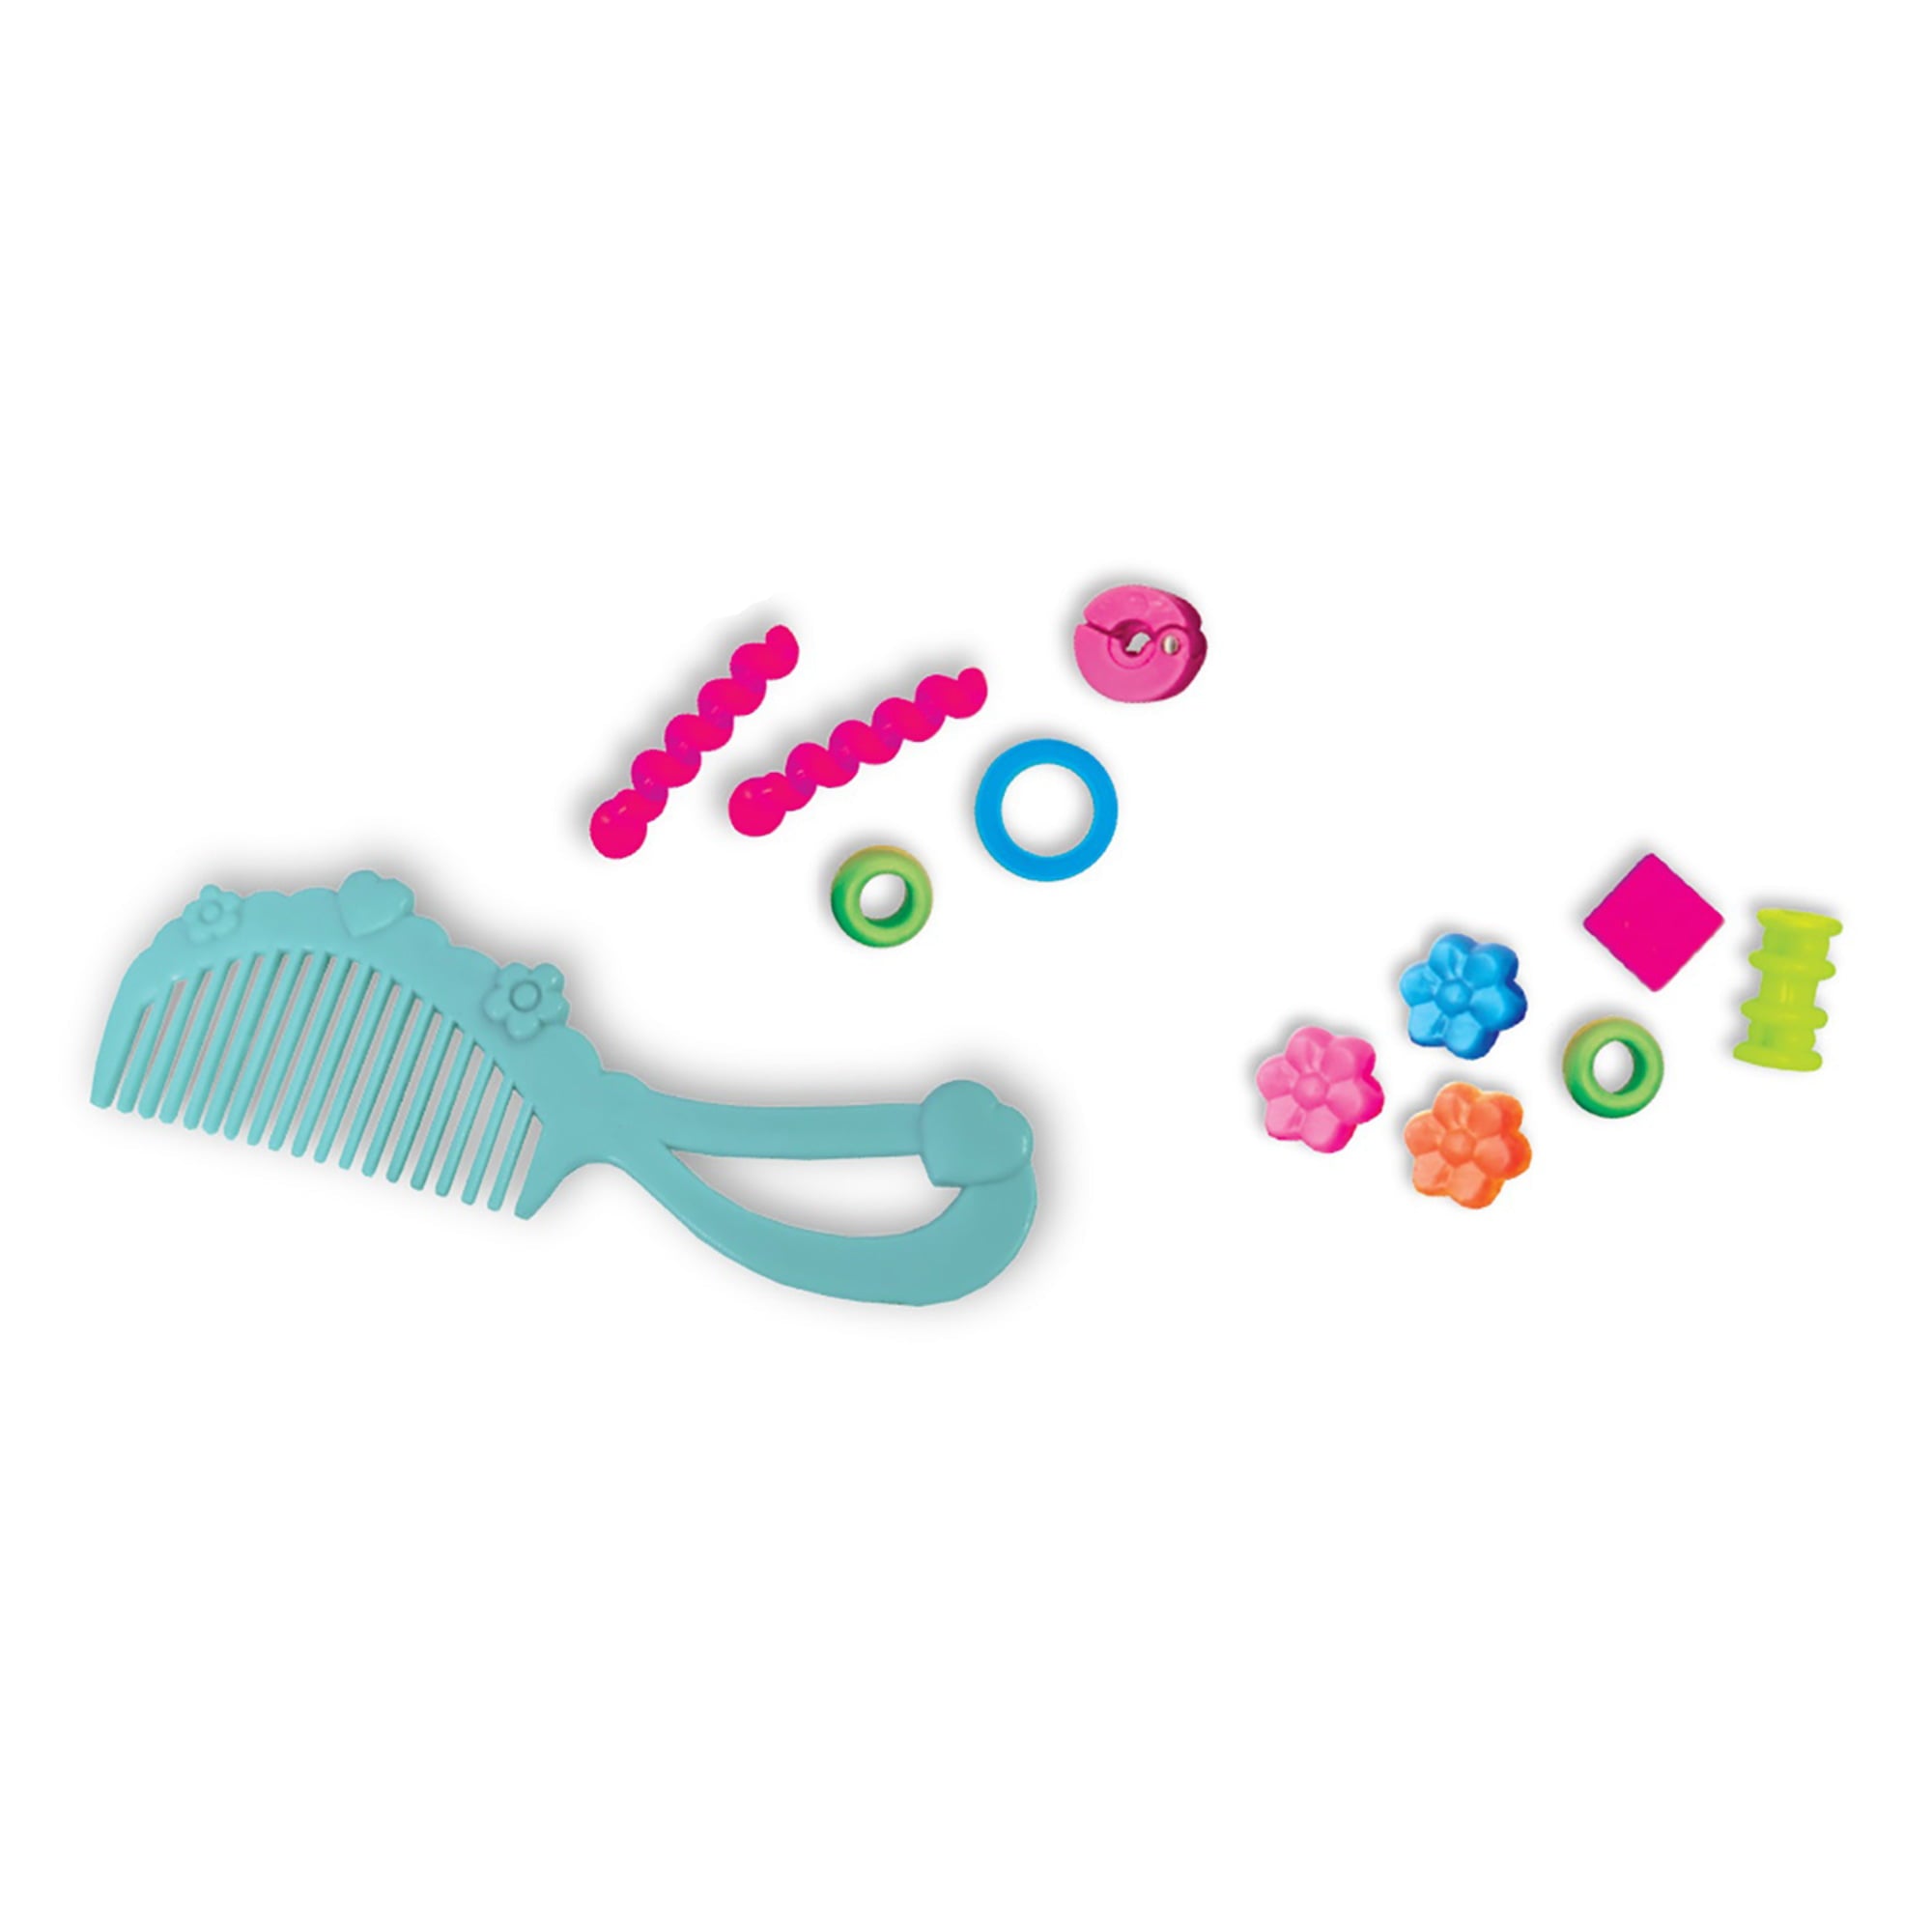 Amav - Fashion Time Bead Threader, Children Ages 6 and Up